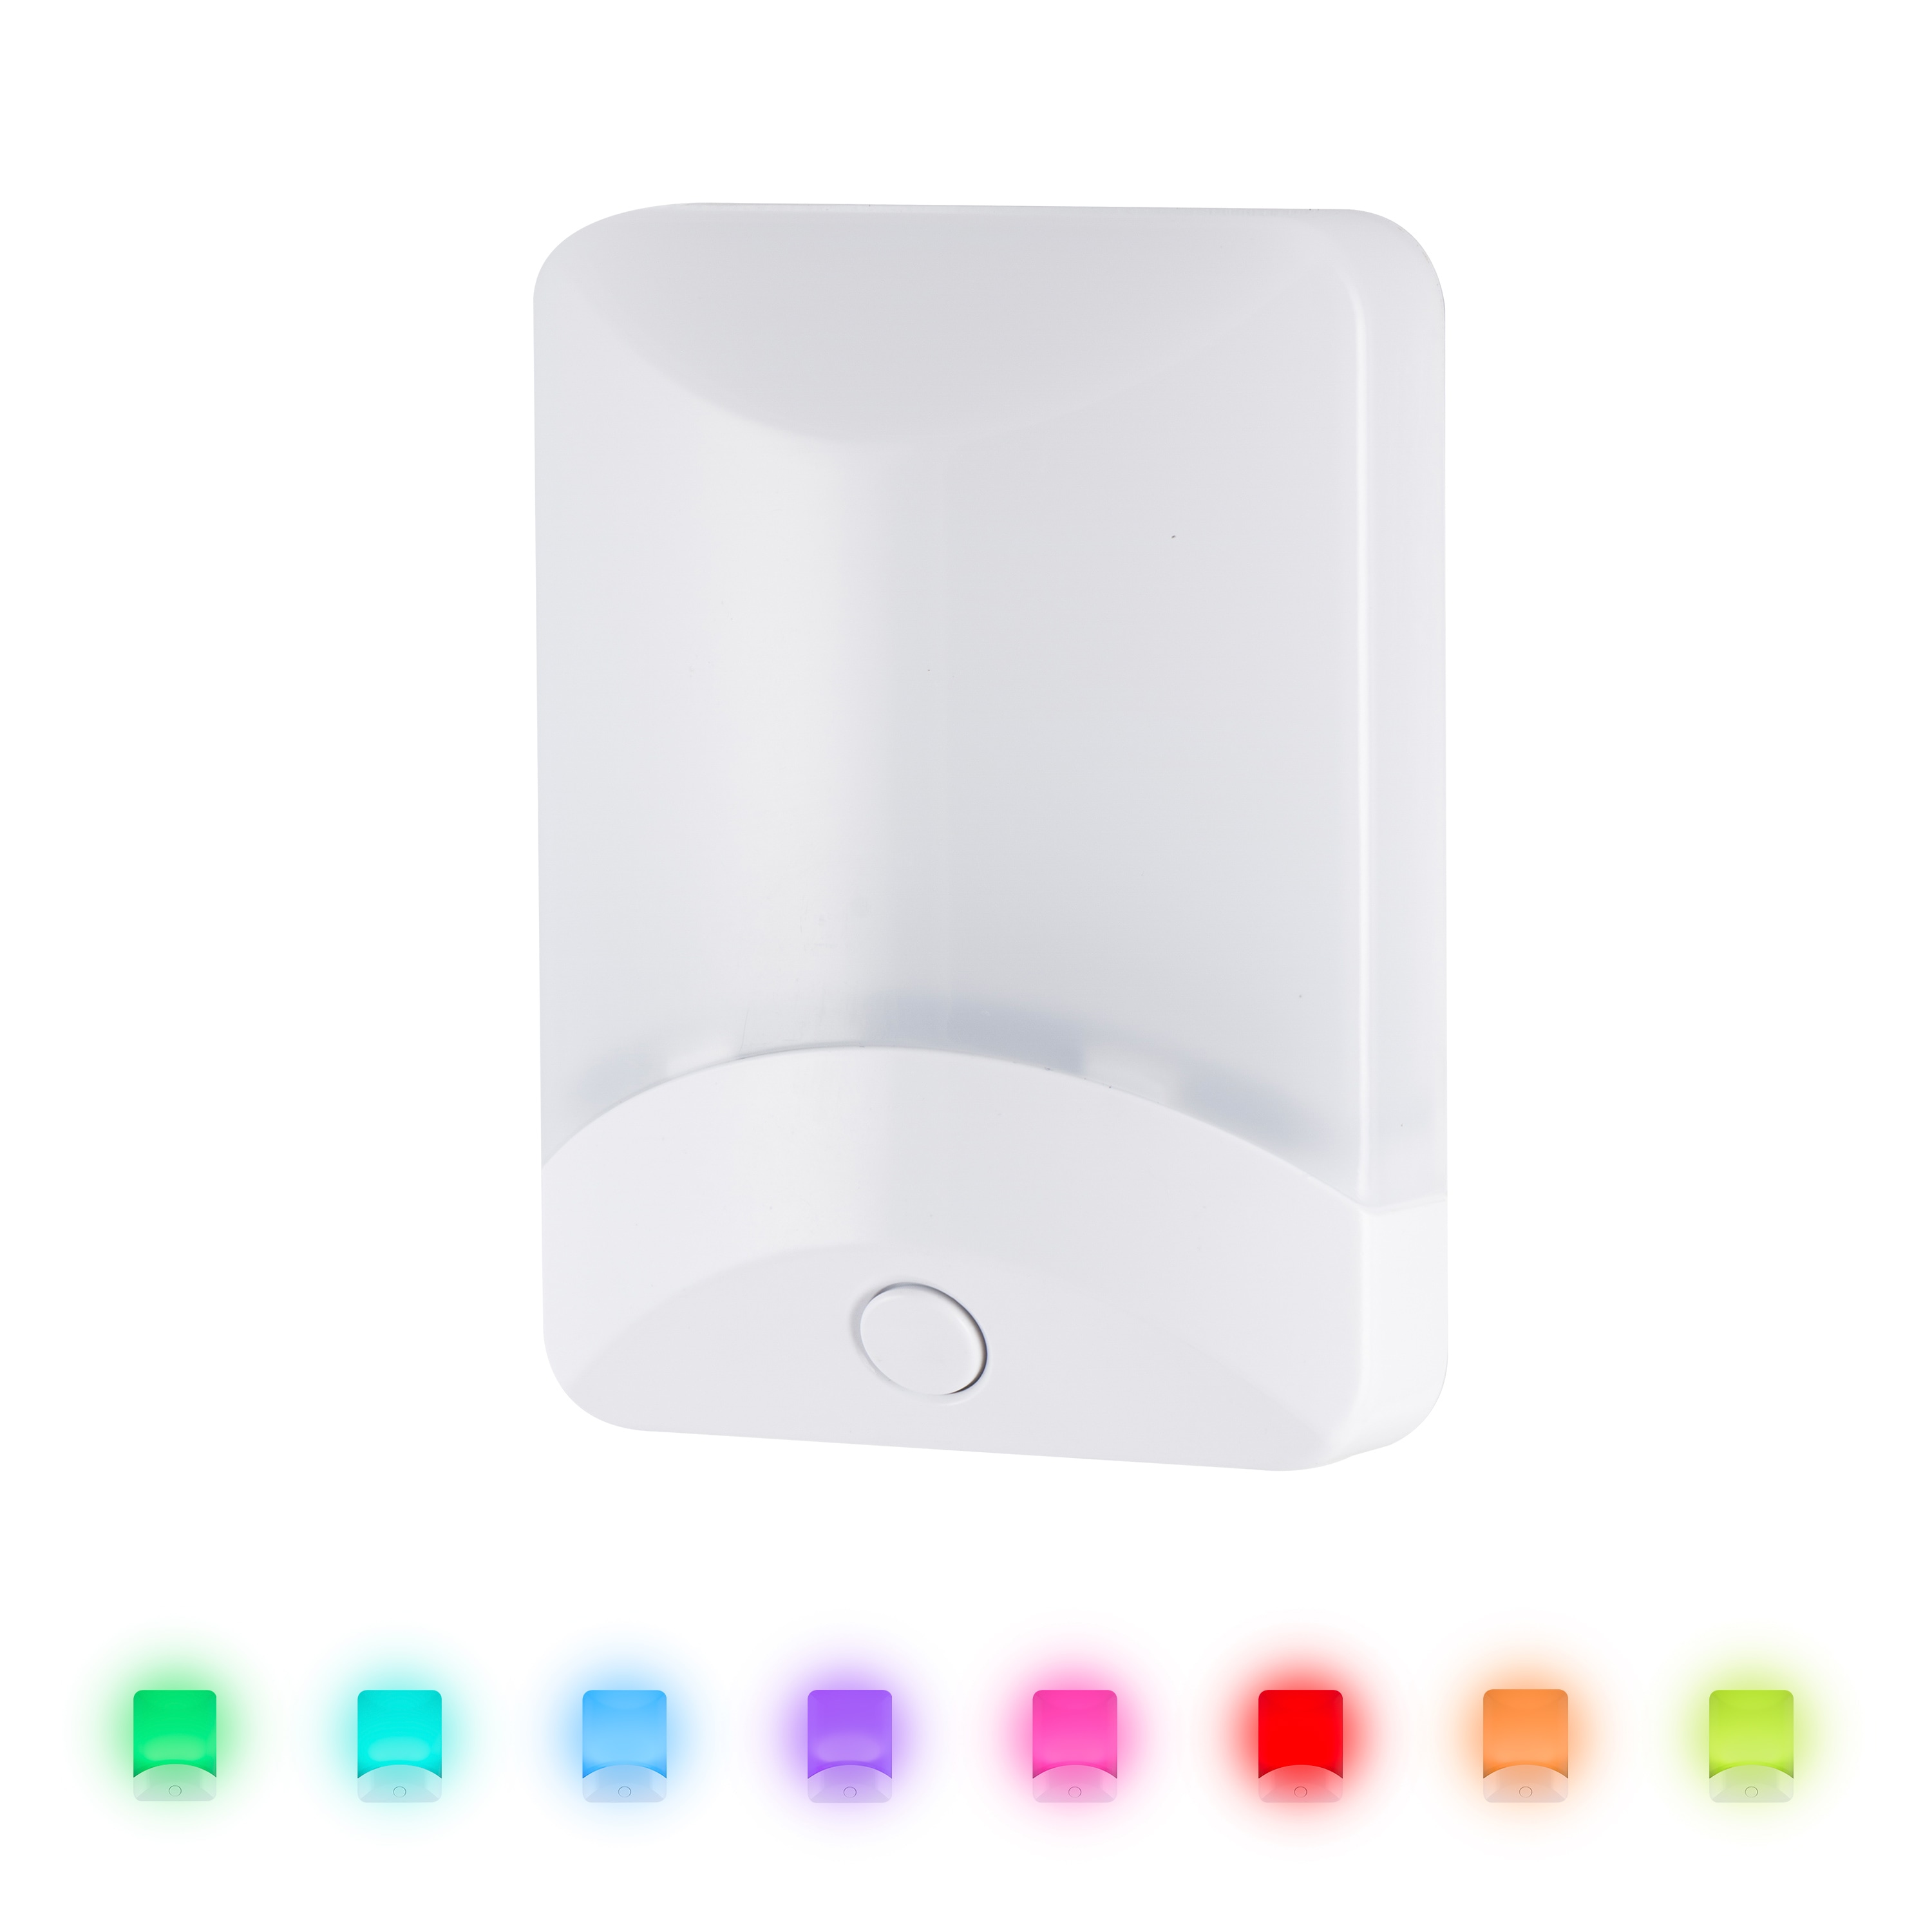 Enbrighten Color Changing LED Auto On/Off Night Light in the Night